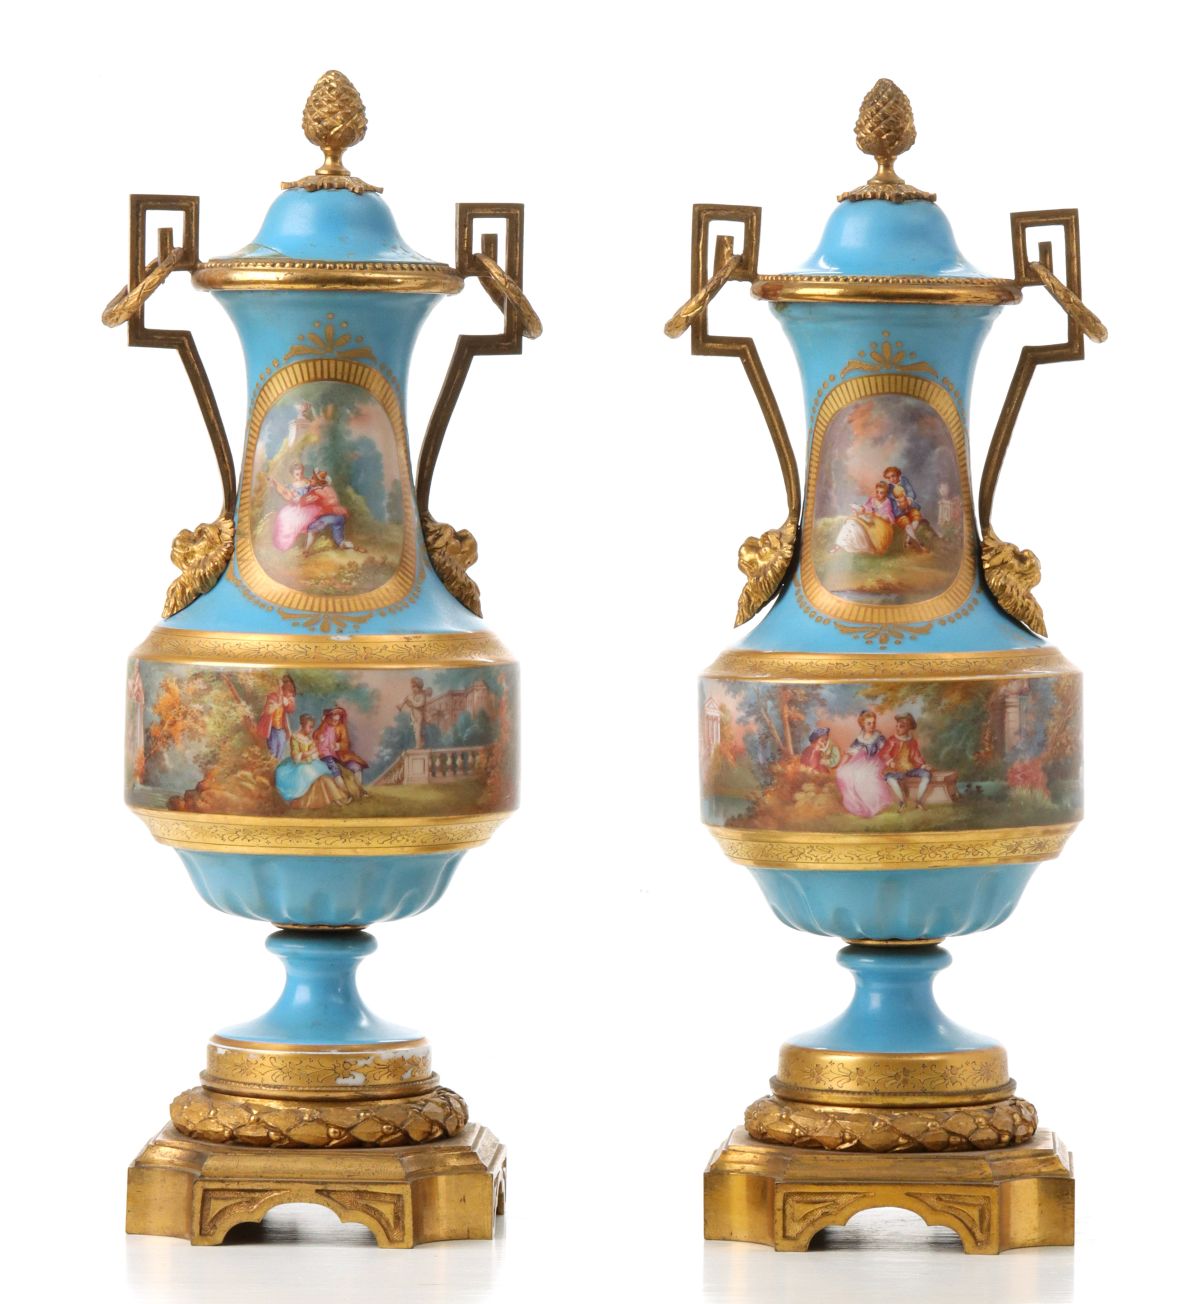 SEVRES STYLE FRENCH PORCELAIN AND GILT BRONZE URNS